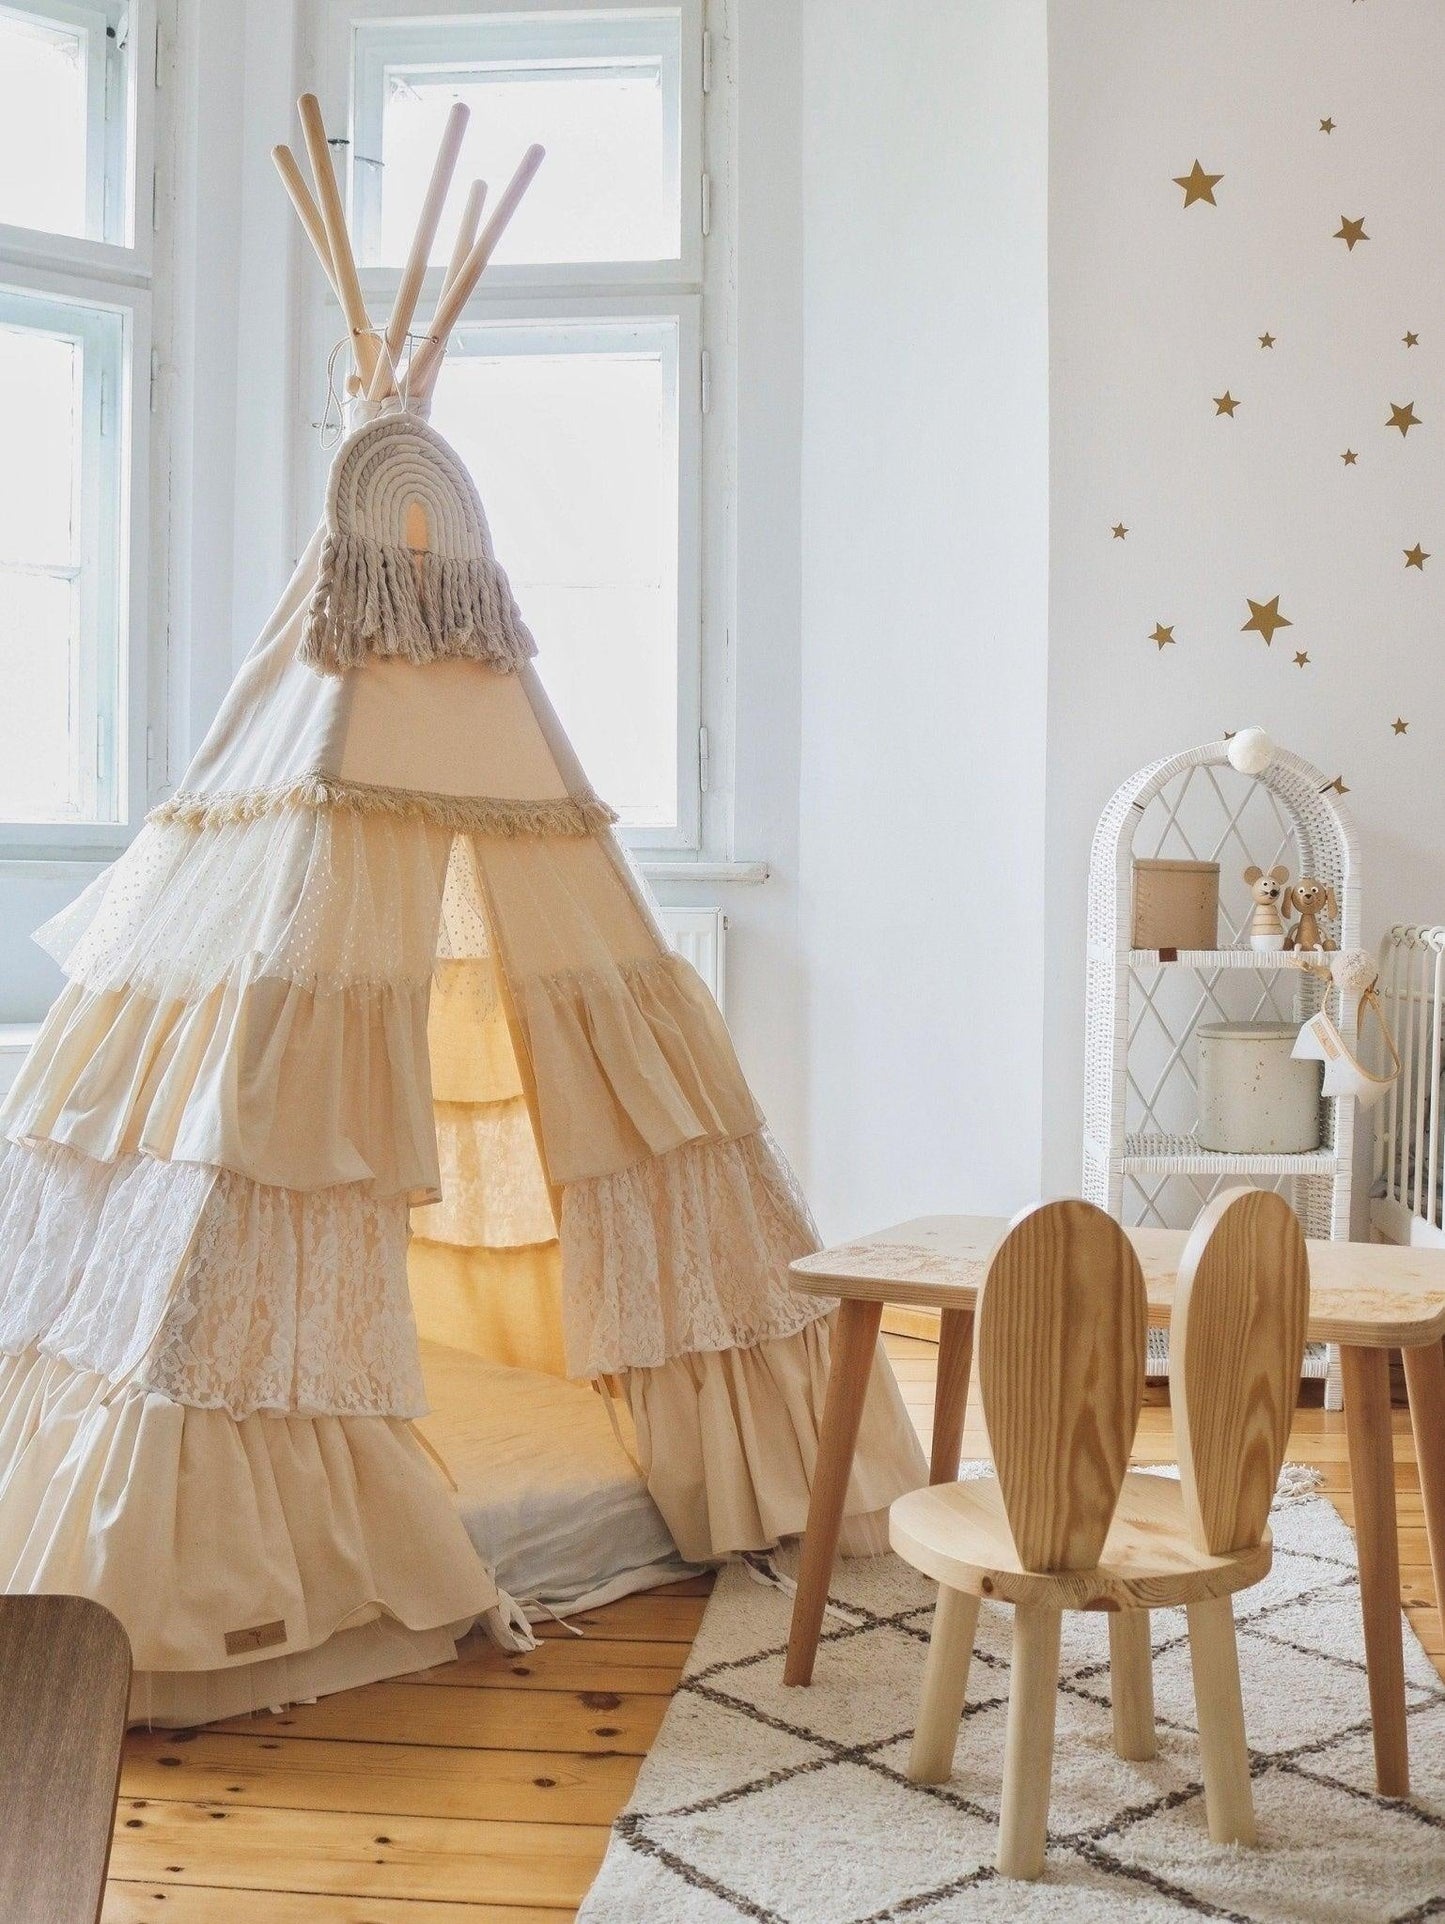 Teepee Tent “Shabby Chic” with Frills